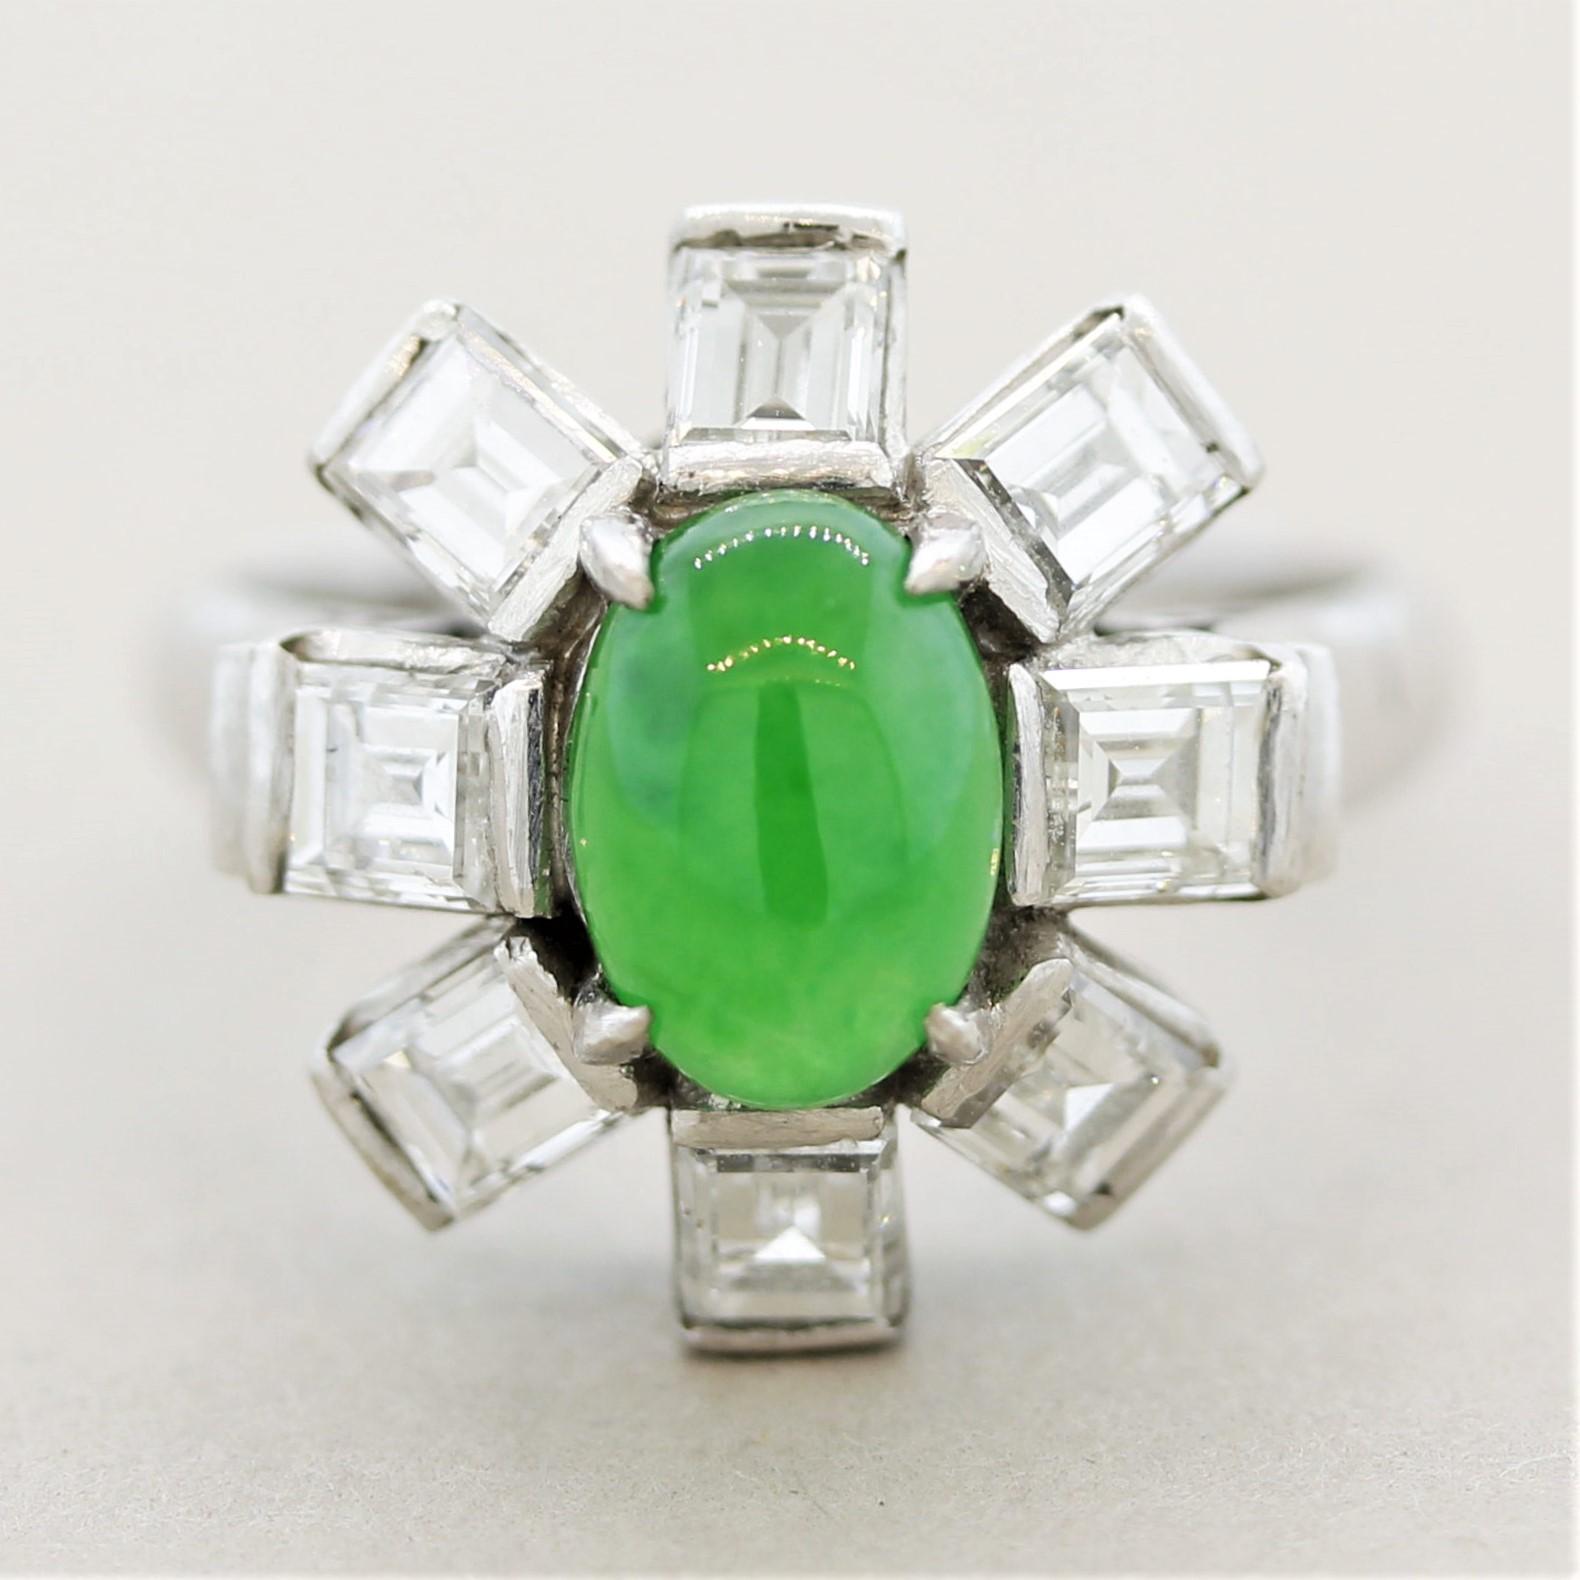 A superb ring in terms of the quality of the gems used as well as the design and setting. It features a luscious bright green natural jadeite jade which has excellent luster as light appears to roll off the stones surface. It is accented by 1.70